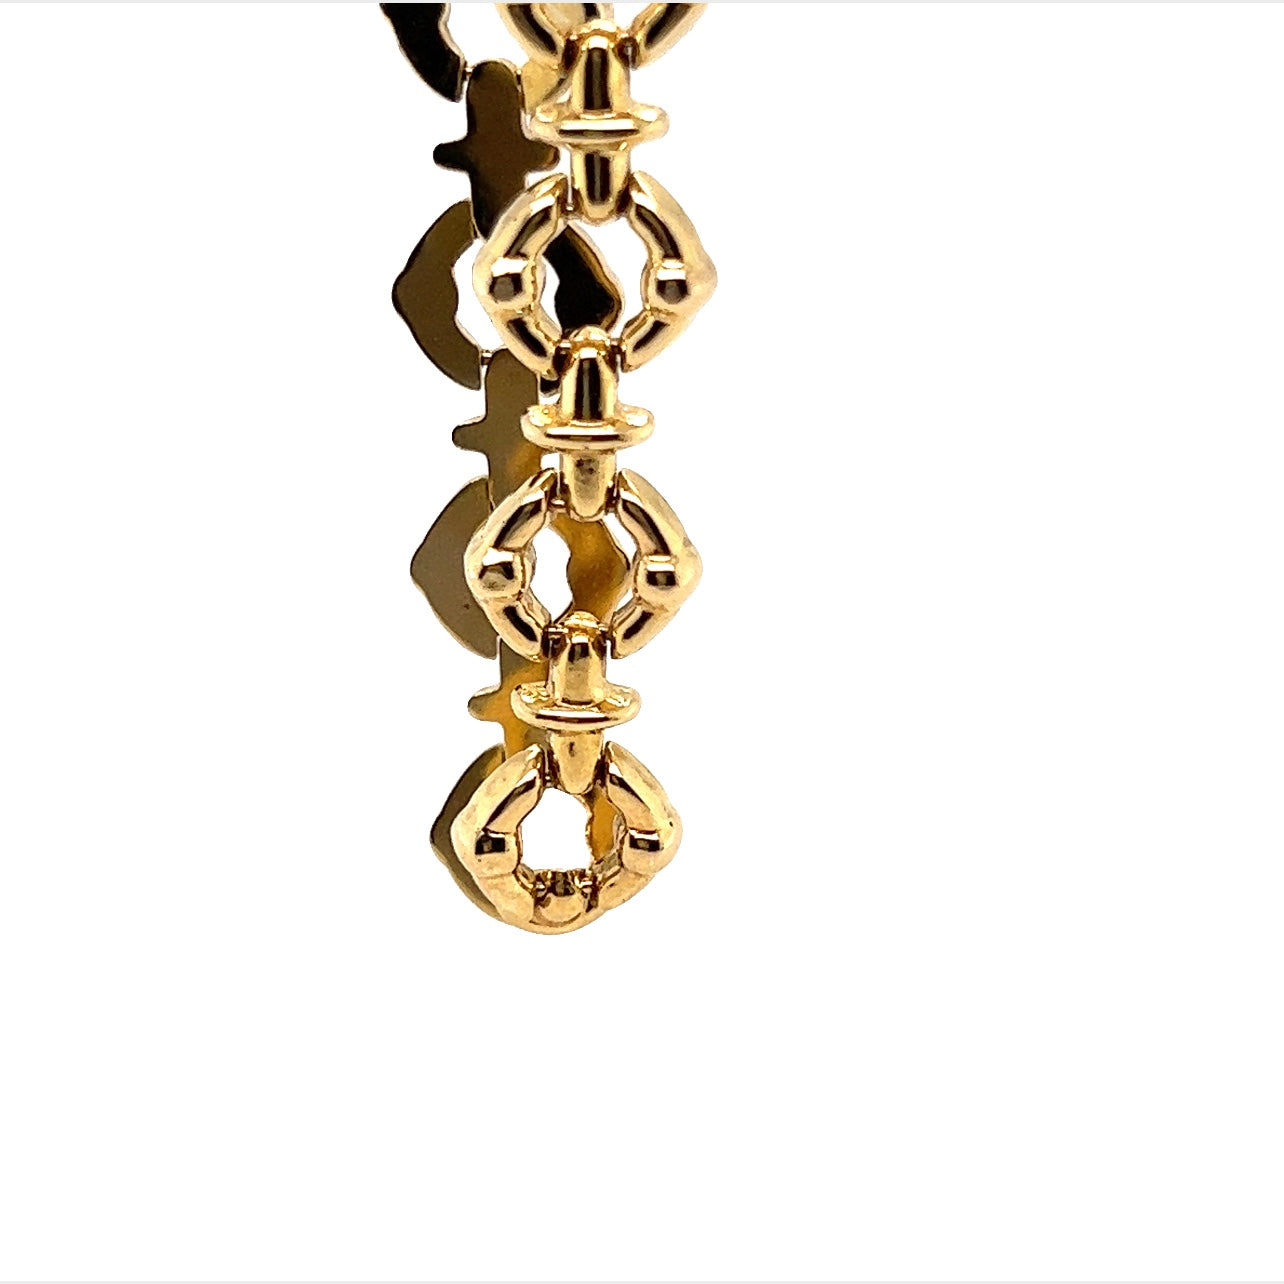 Yellow Gold Fancy Link Chain Necklace